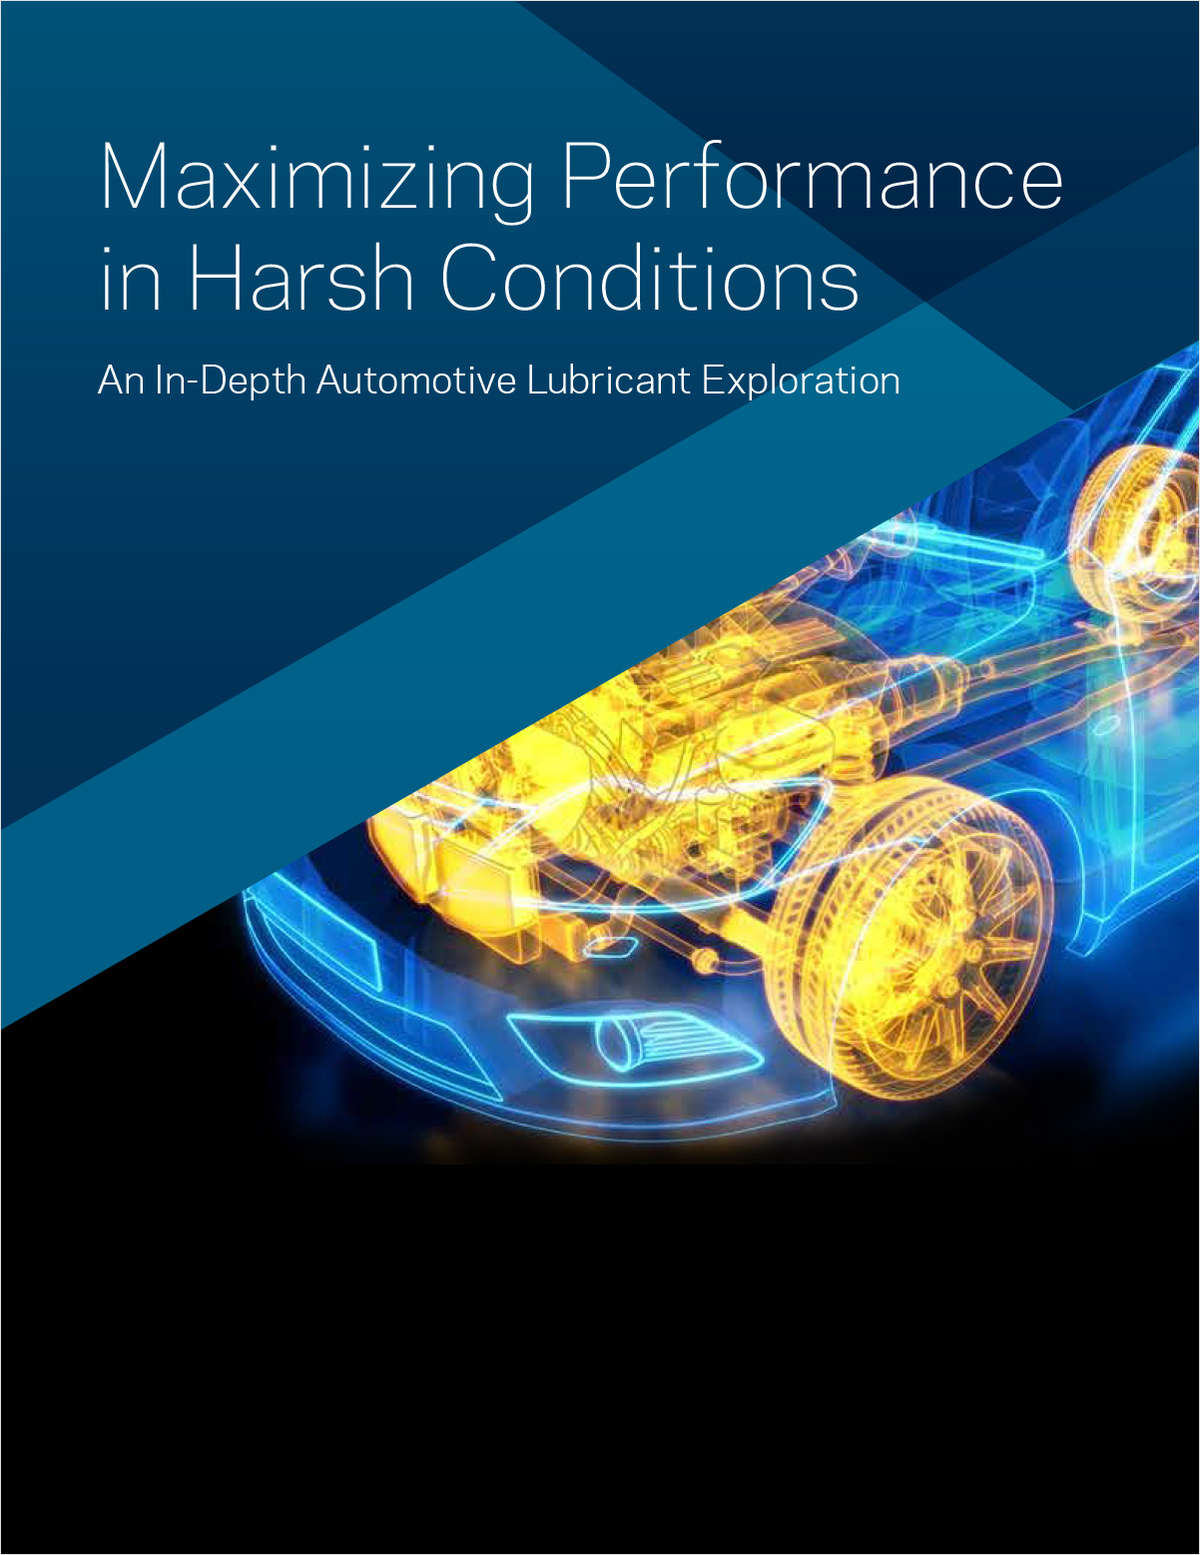 Maximizing Performance in Harsh Conditions: An In-Depth Automotive Lubricant Exploration